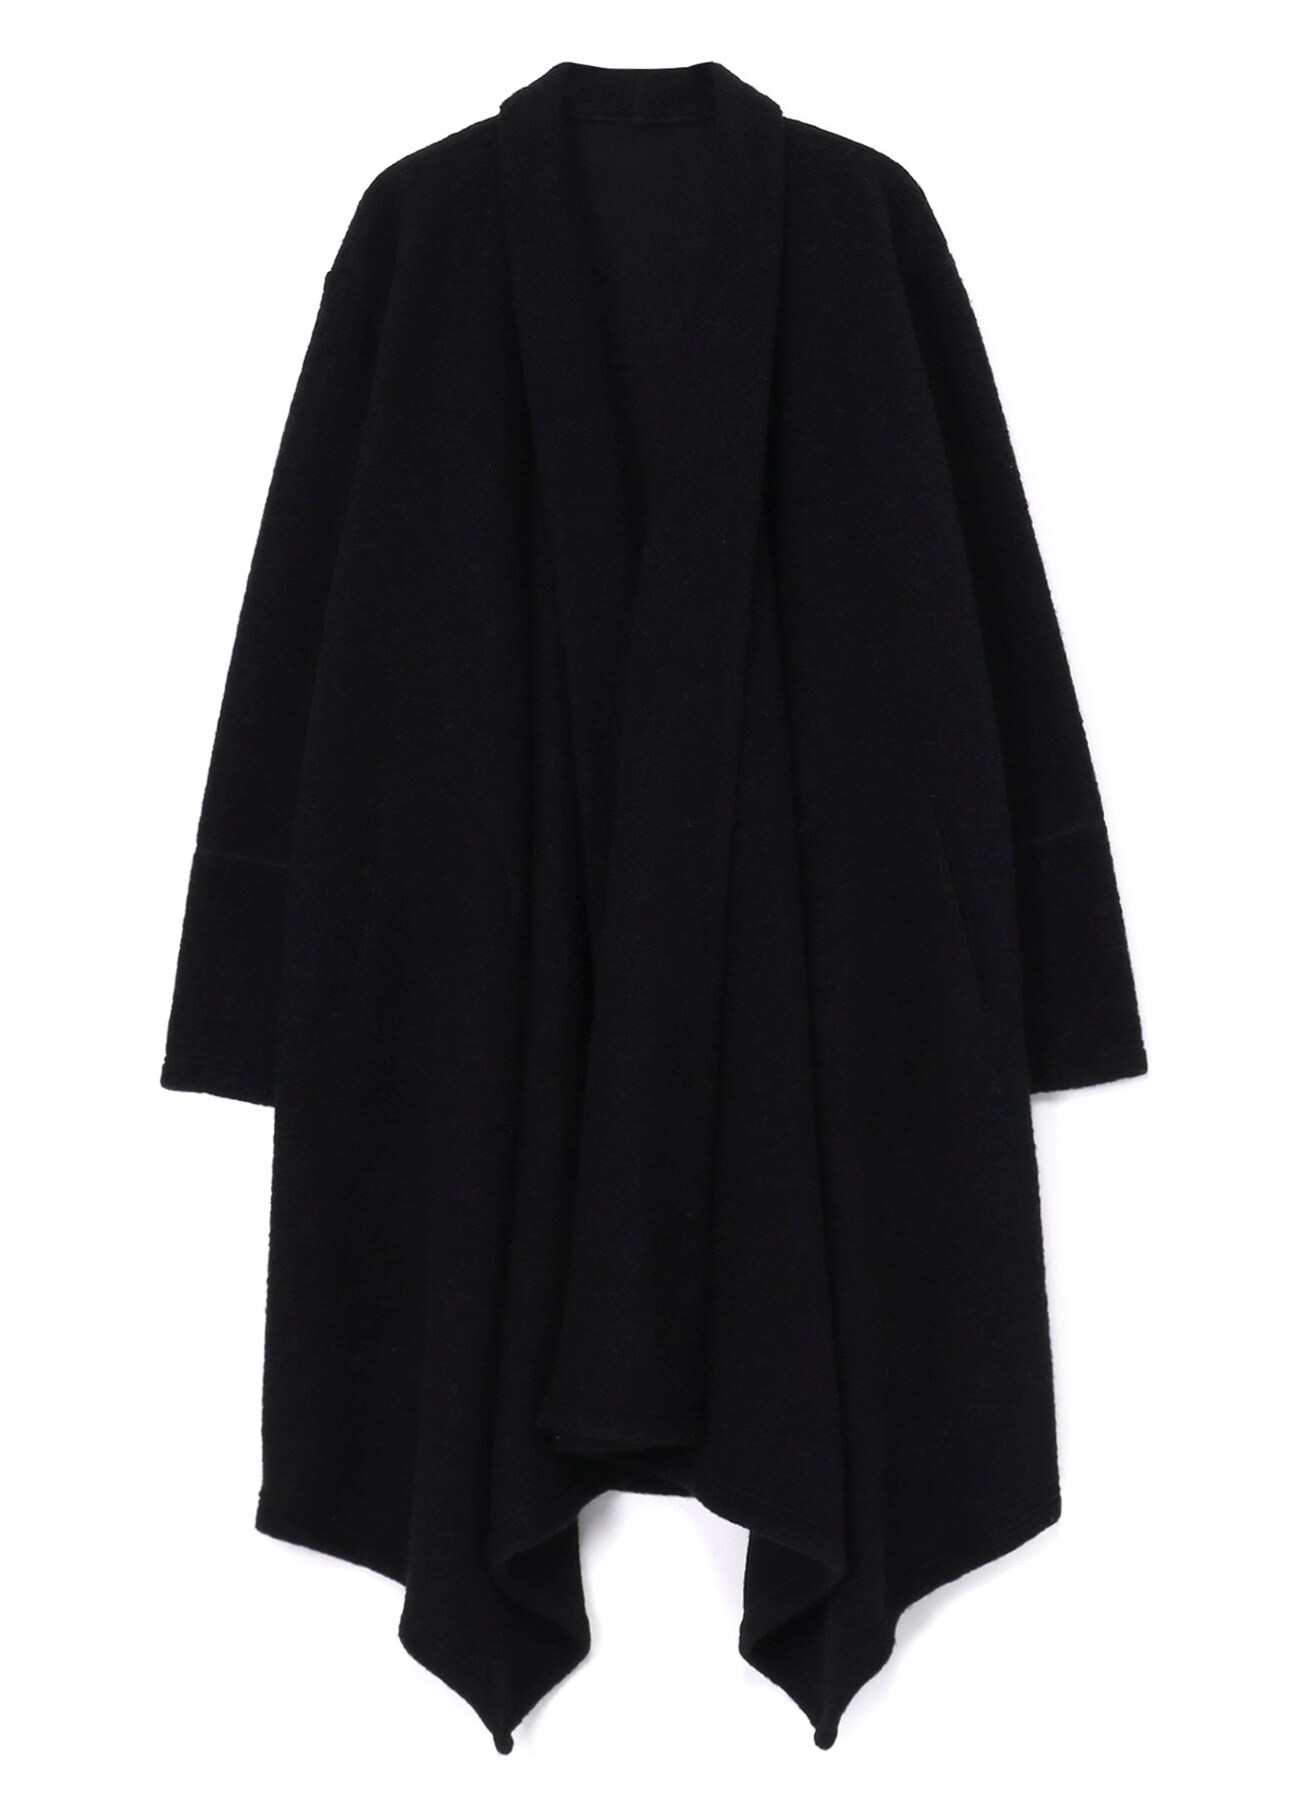 Airy jersey Front drape cardigan